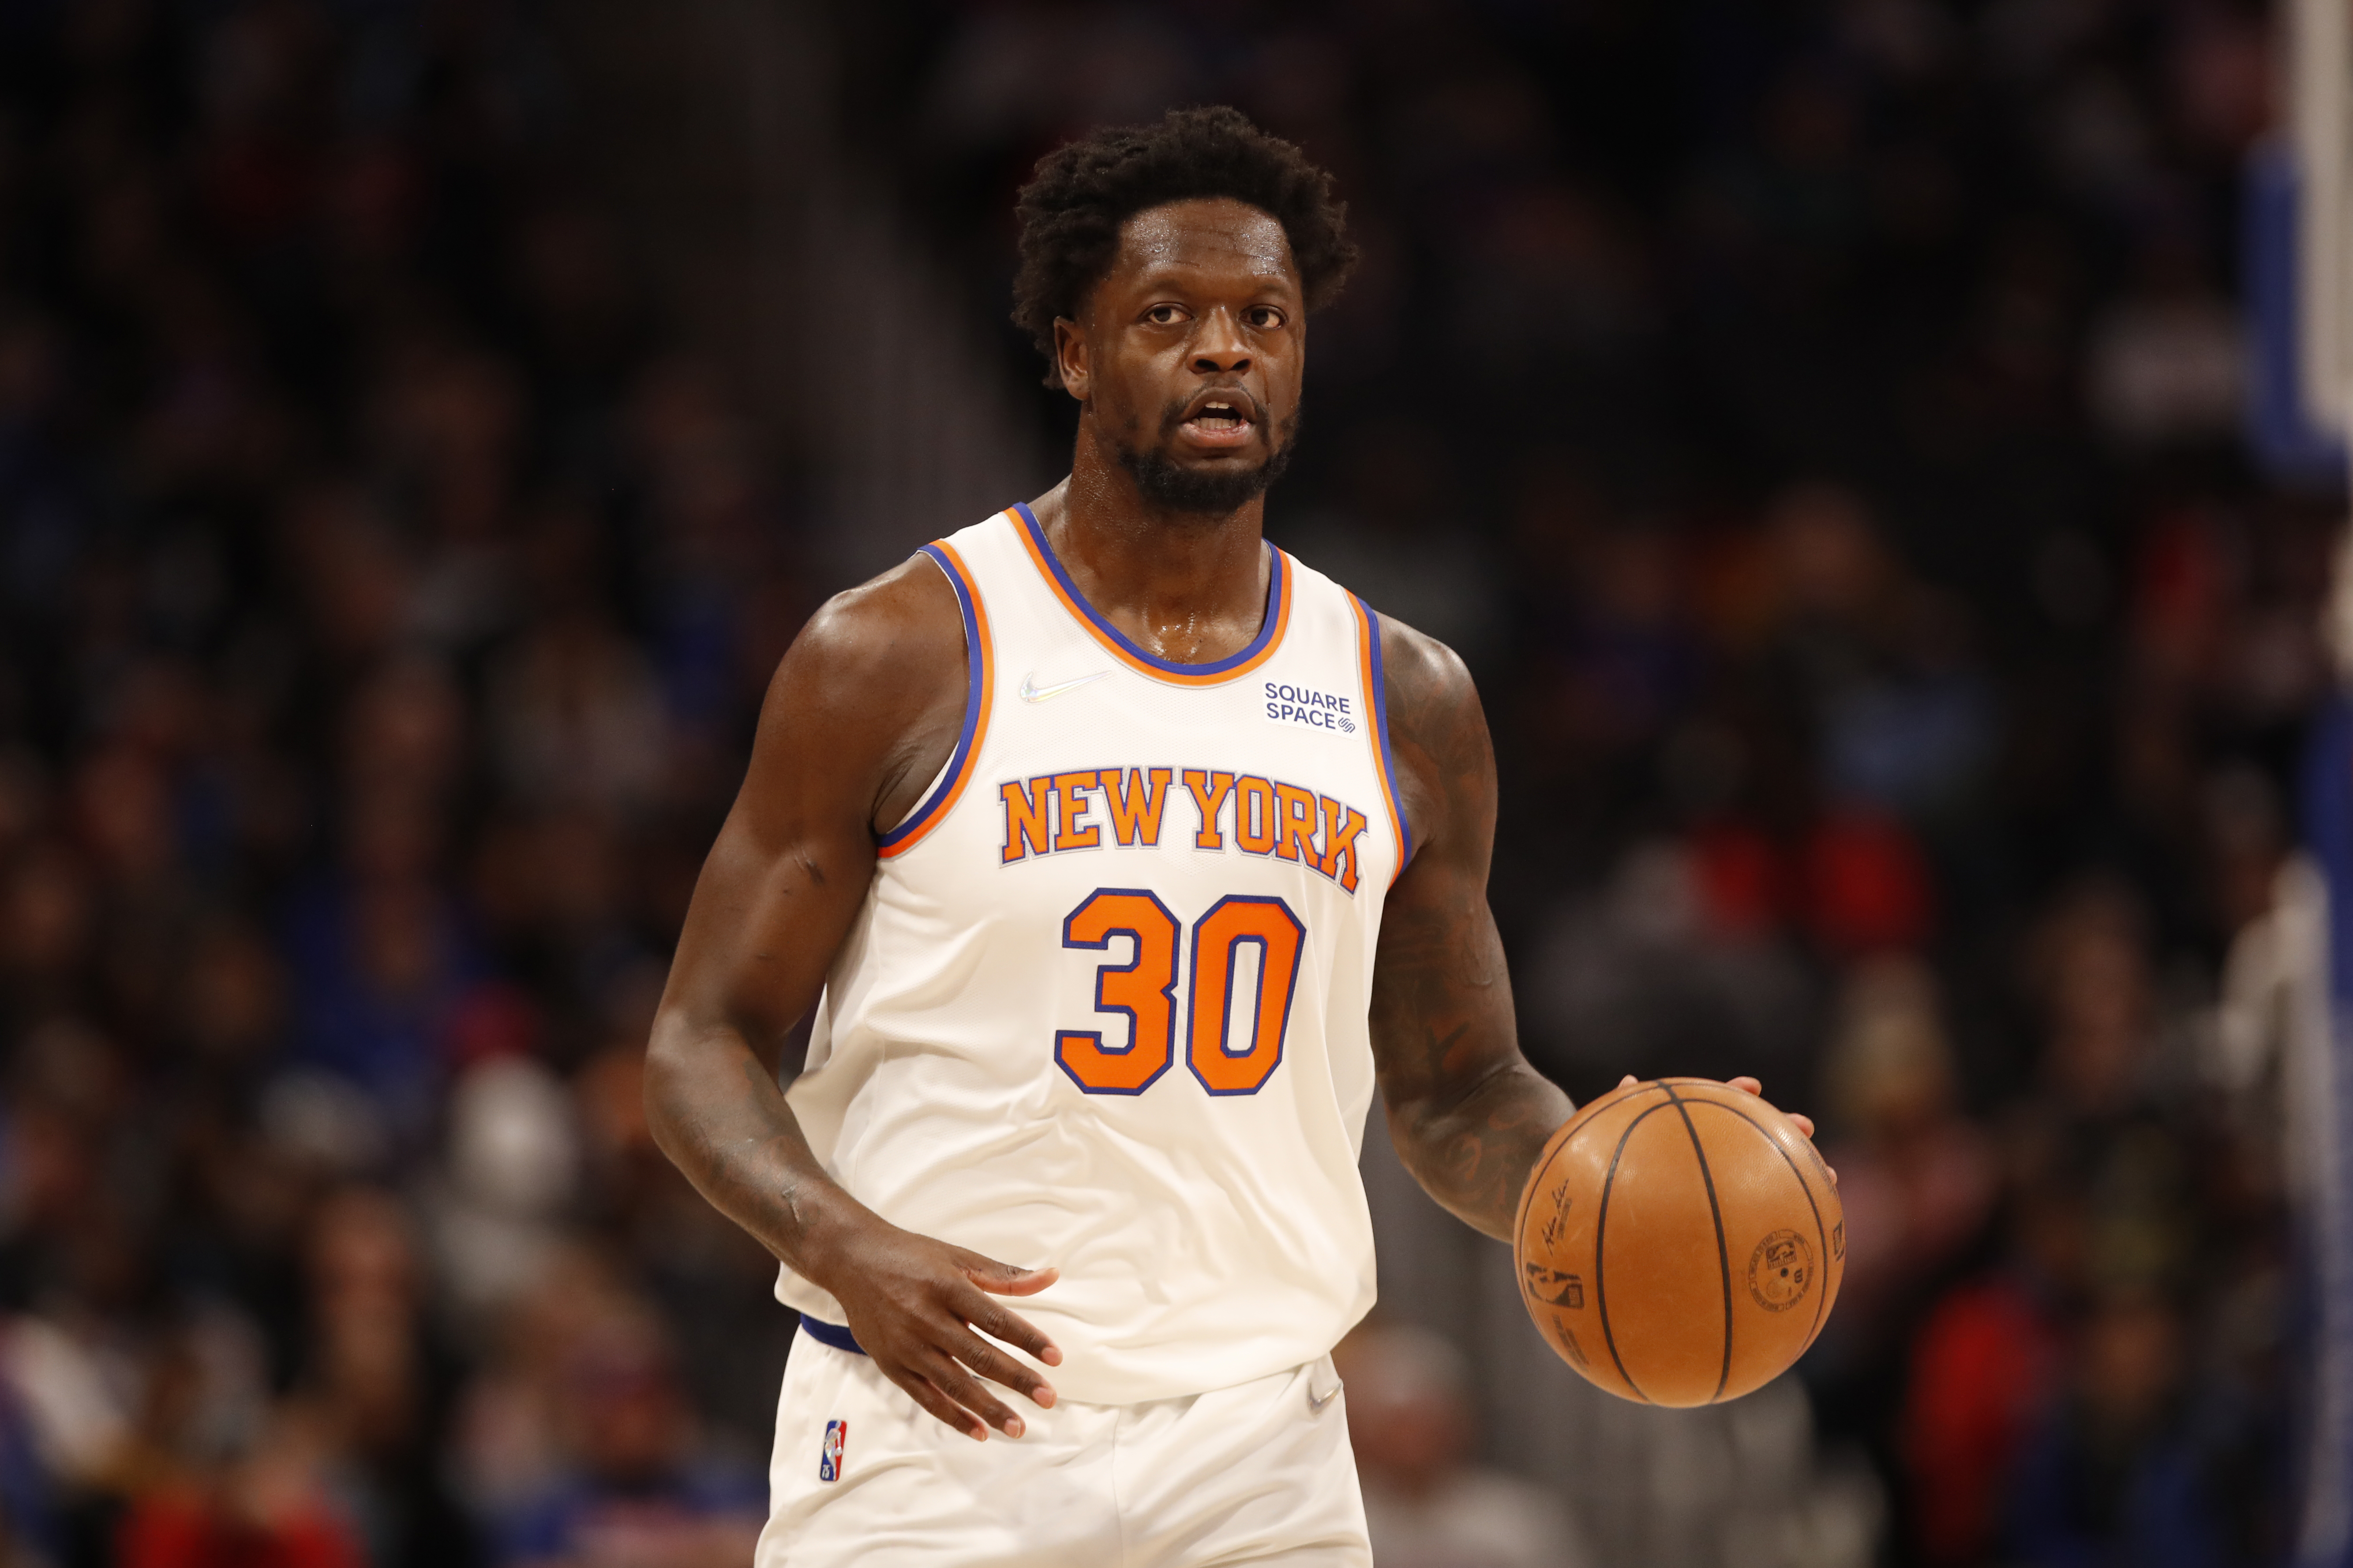 Knicks' Julius Randle Likely to Miss Rest of Season with Quad Injury, Thibodeau ..